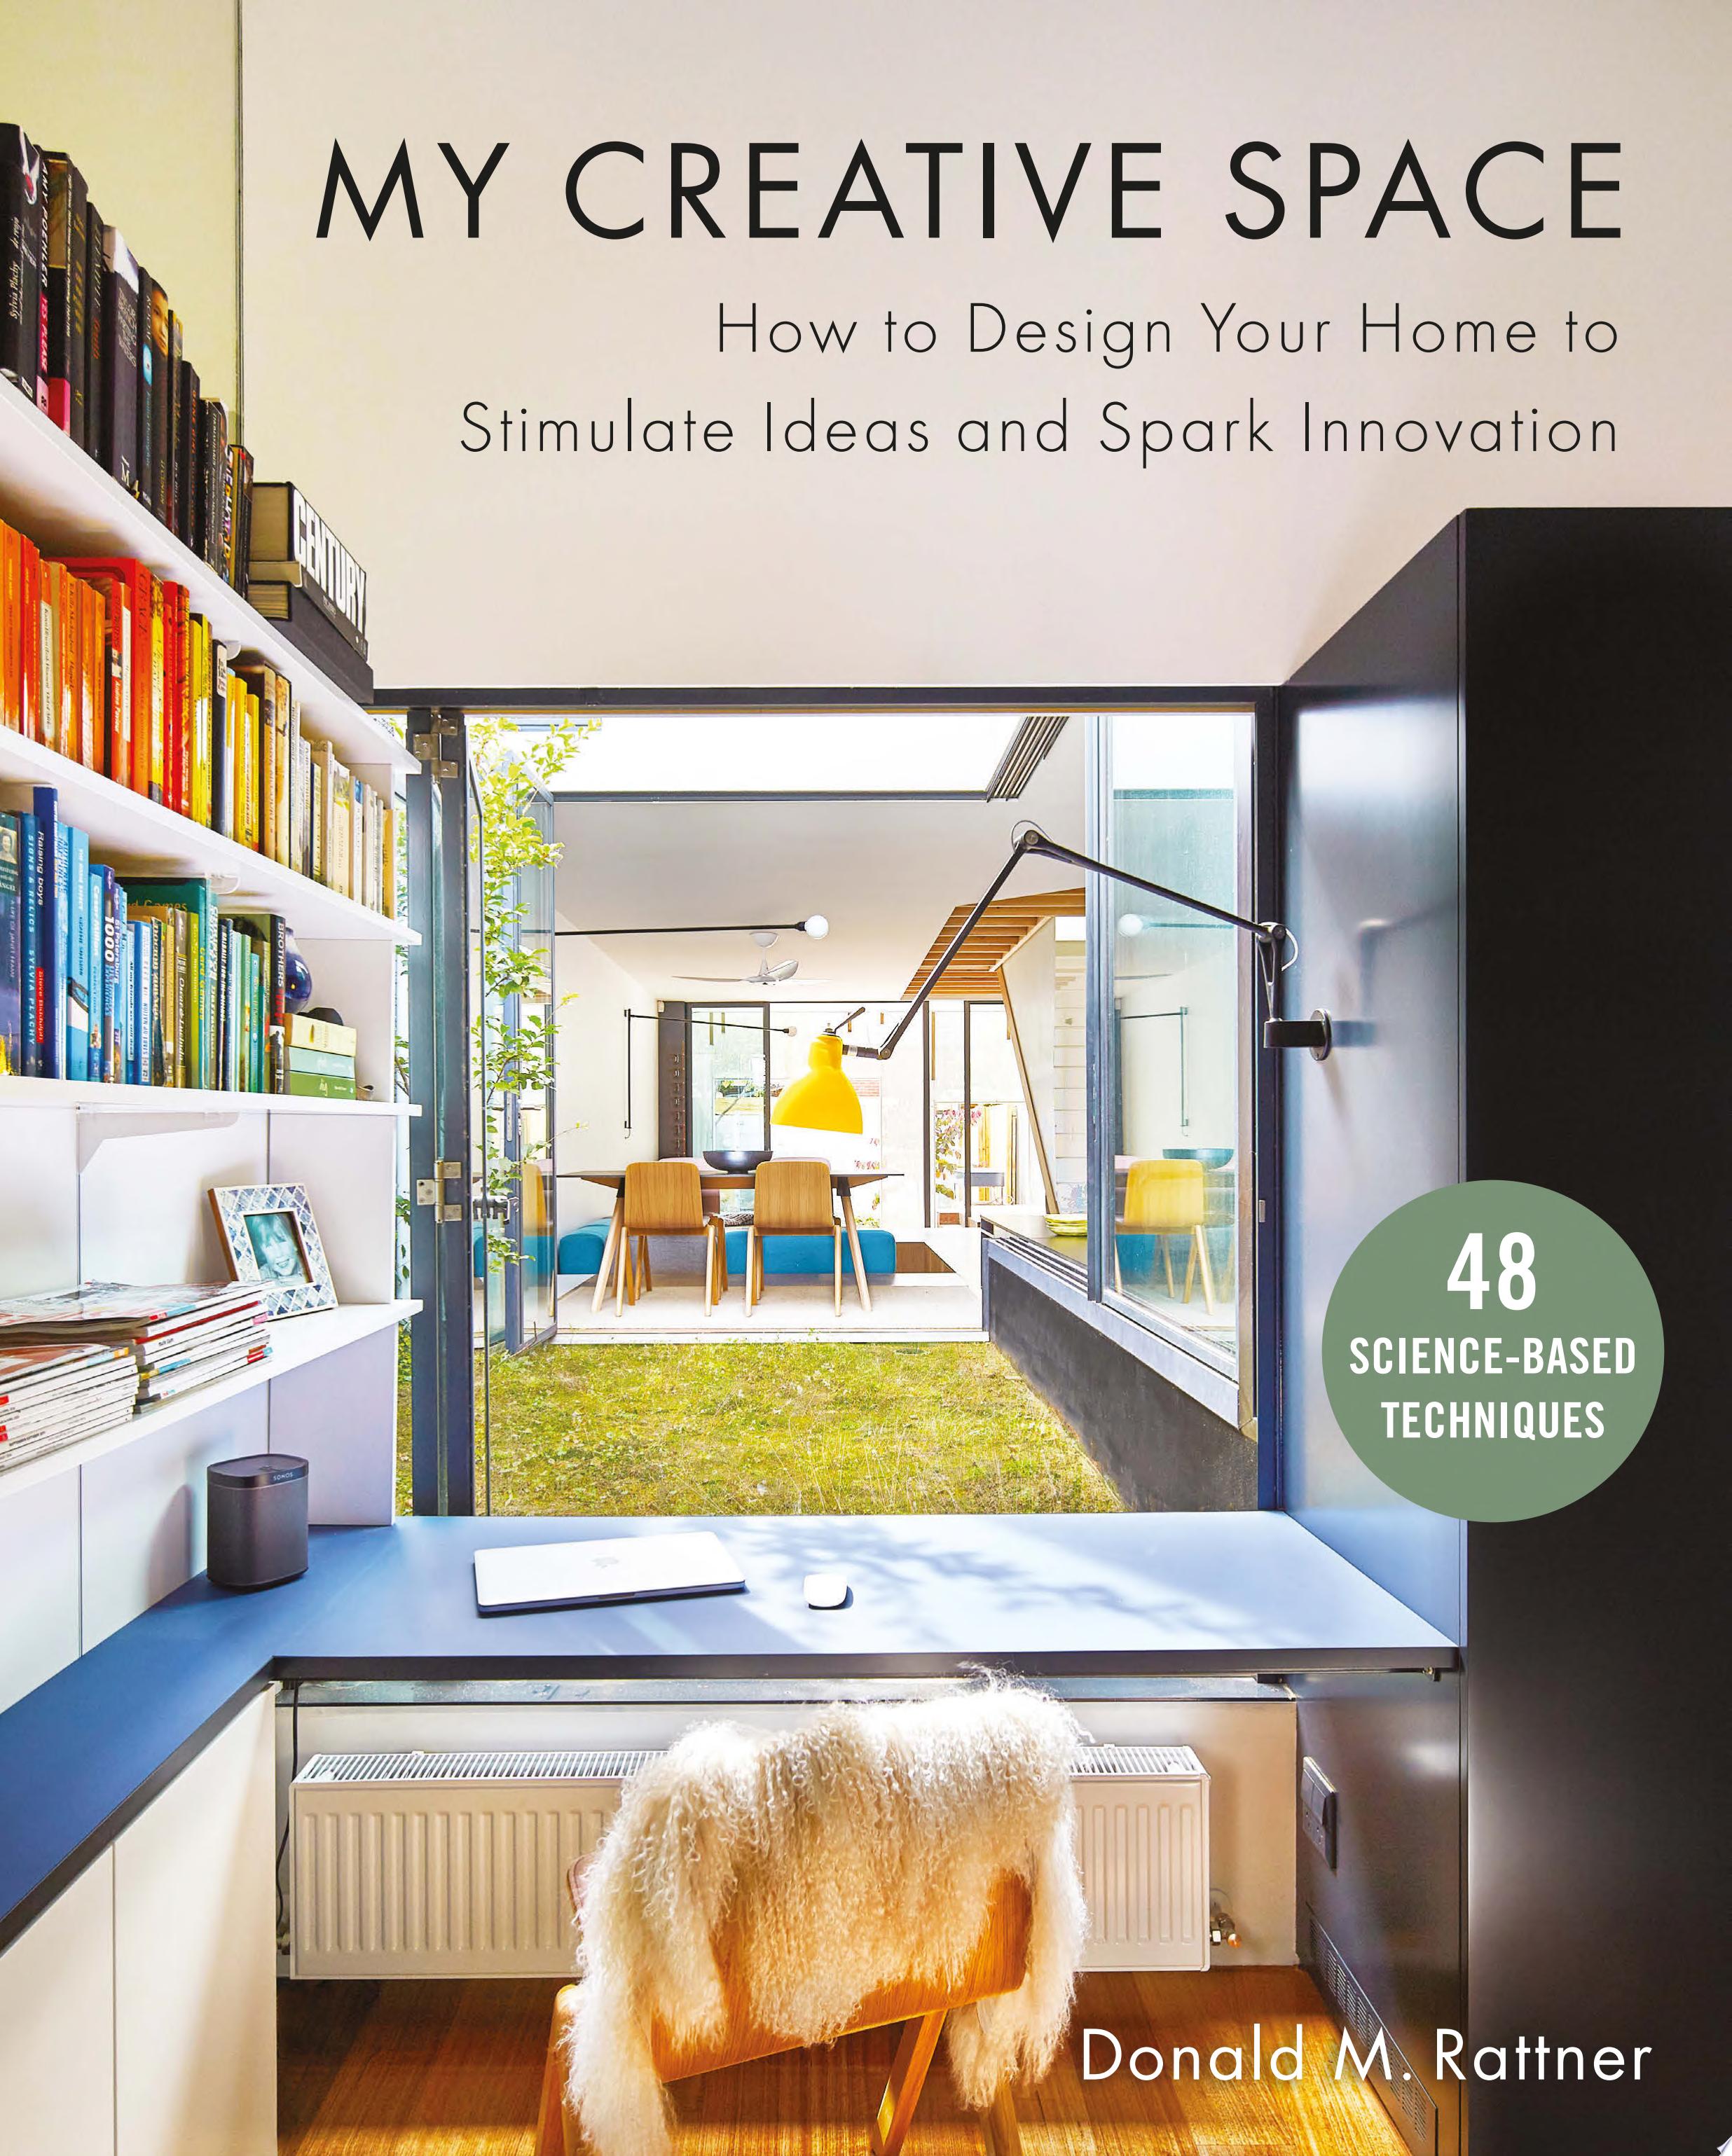 Image for "My Creative Space"